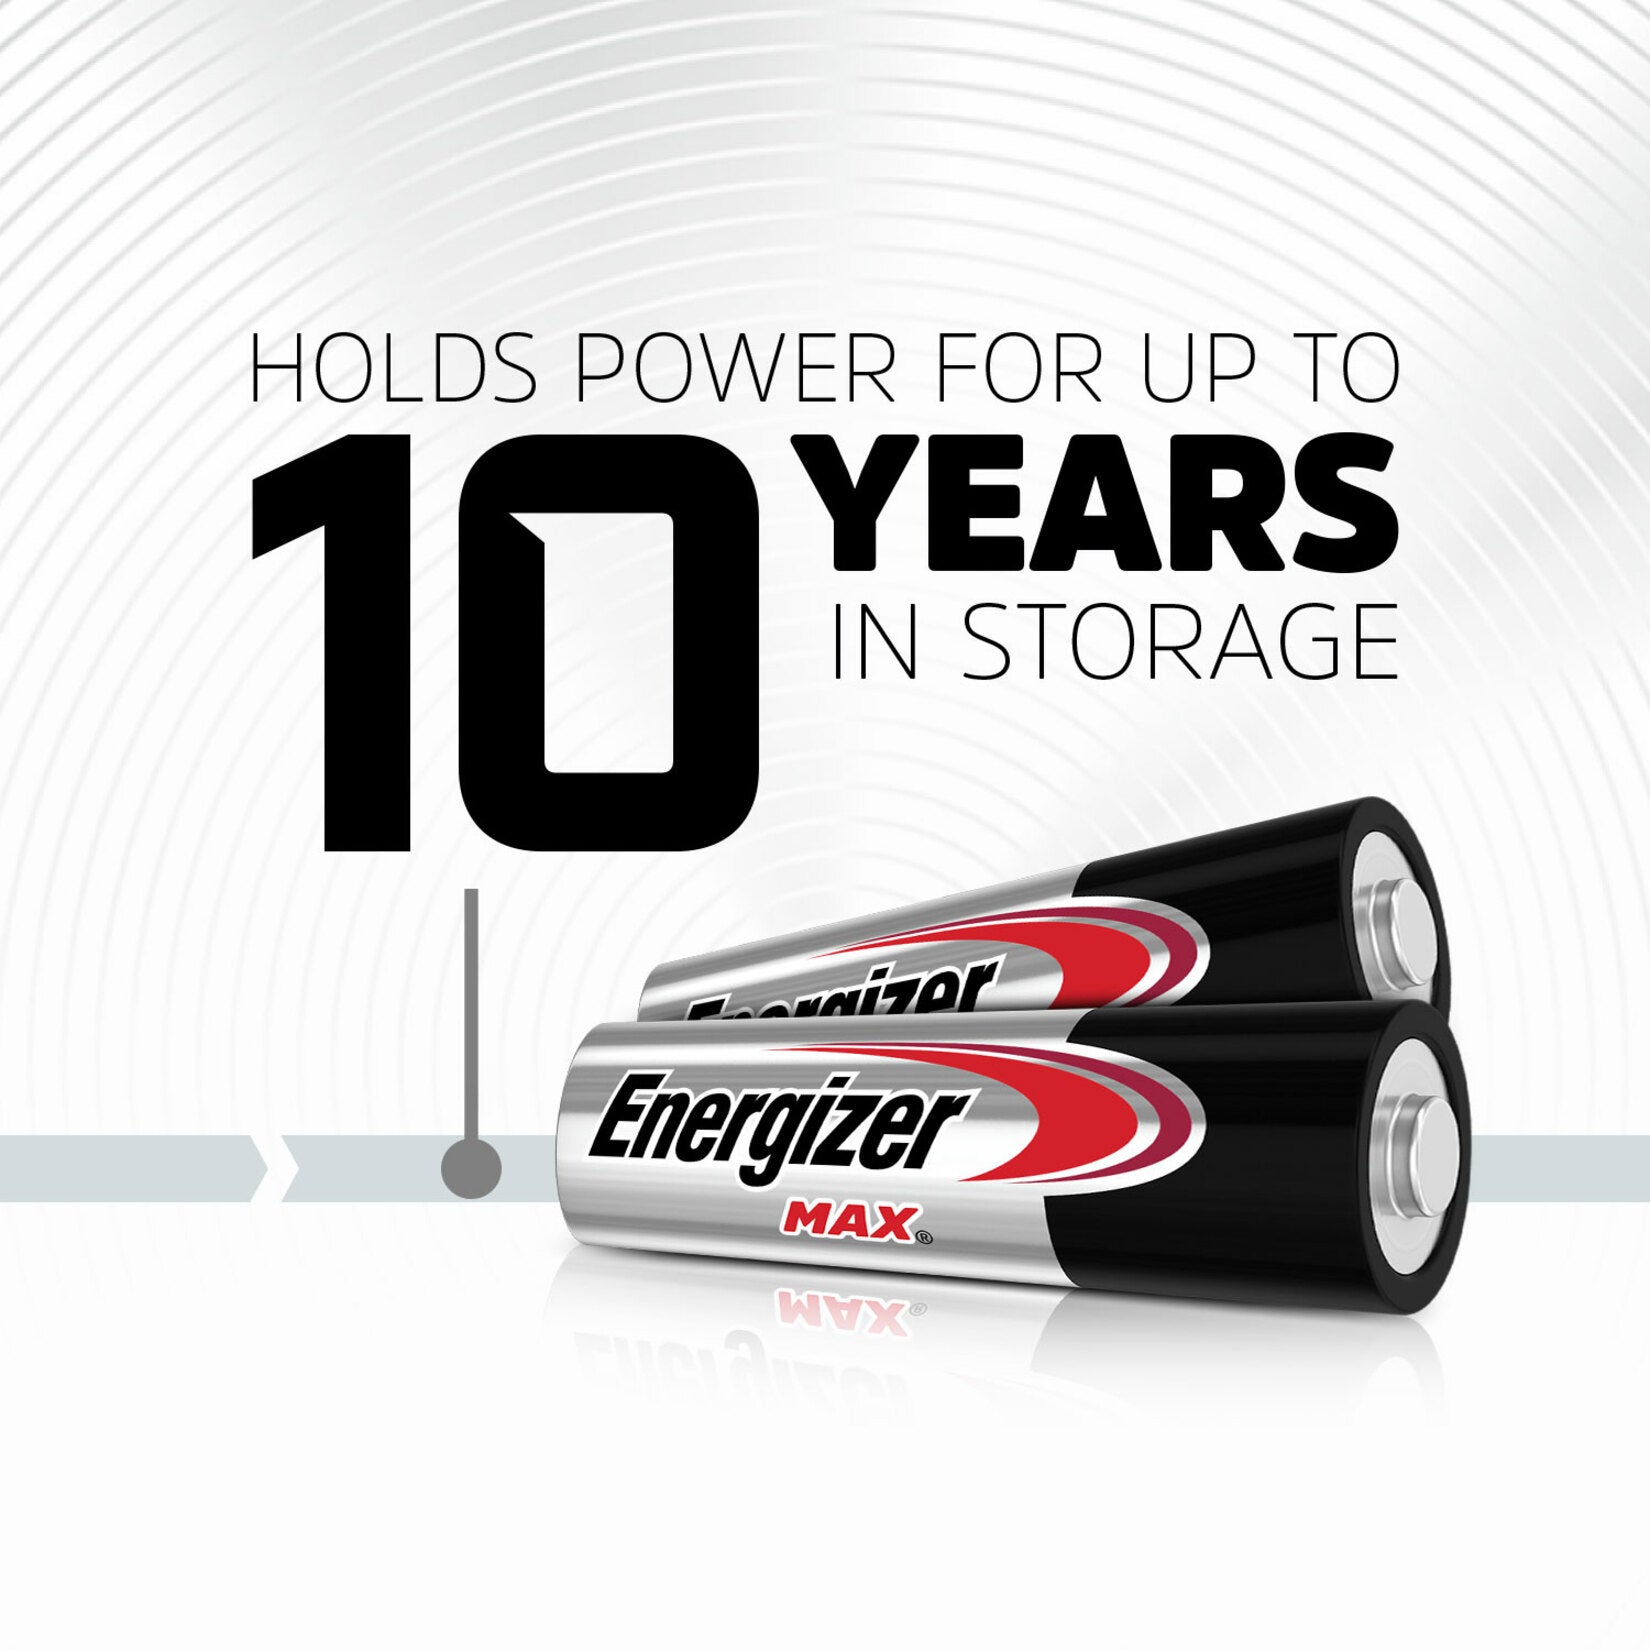 Energizer E91LP-16 Max Alkaline AA Batteries, Long-lasting Power for Toys, CD Players, Flashlights